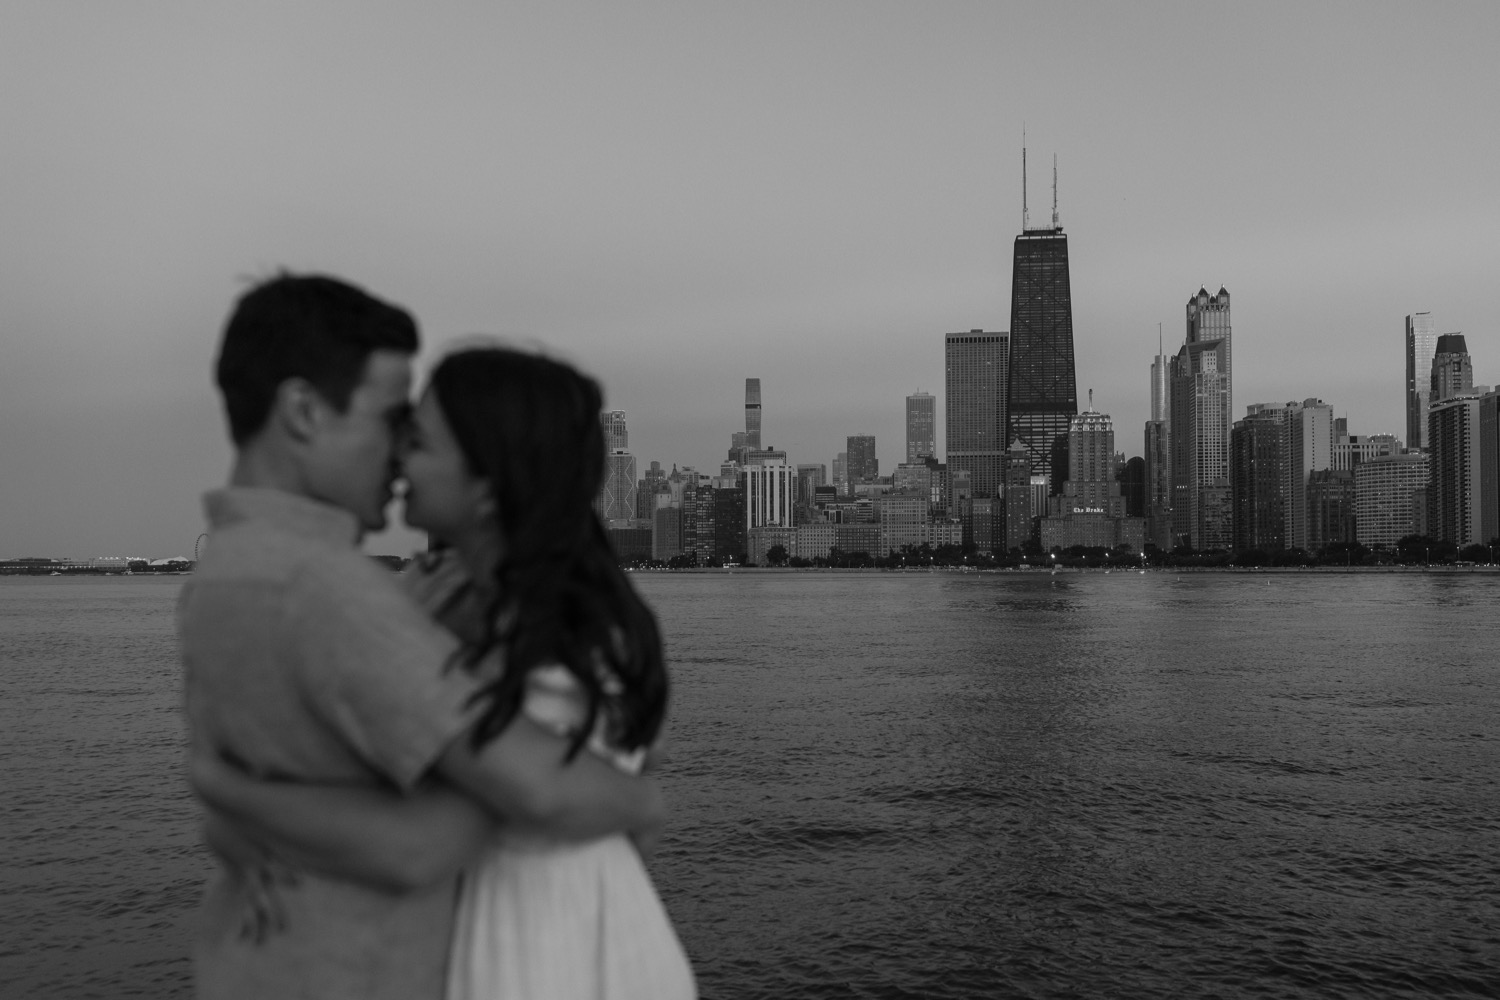 North Ave Beach Chicago Engagement Photos